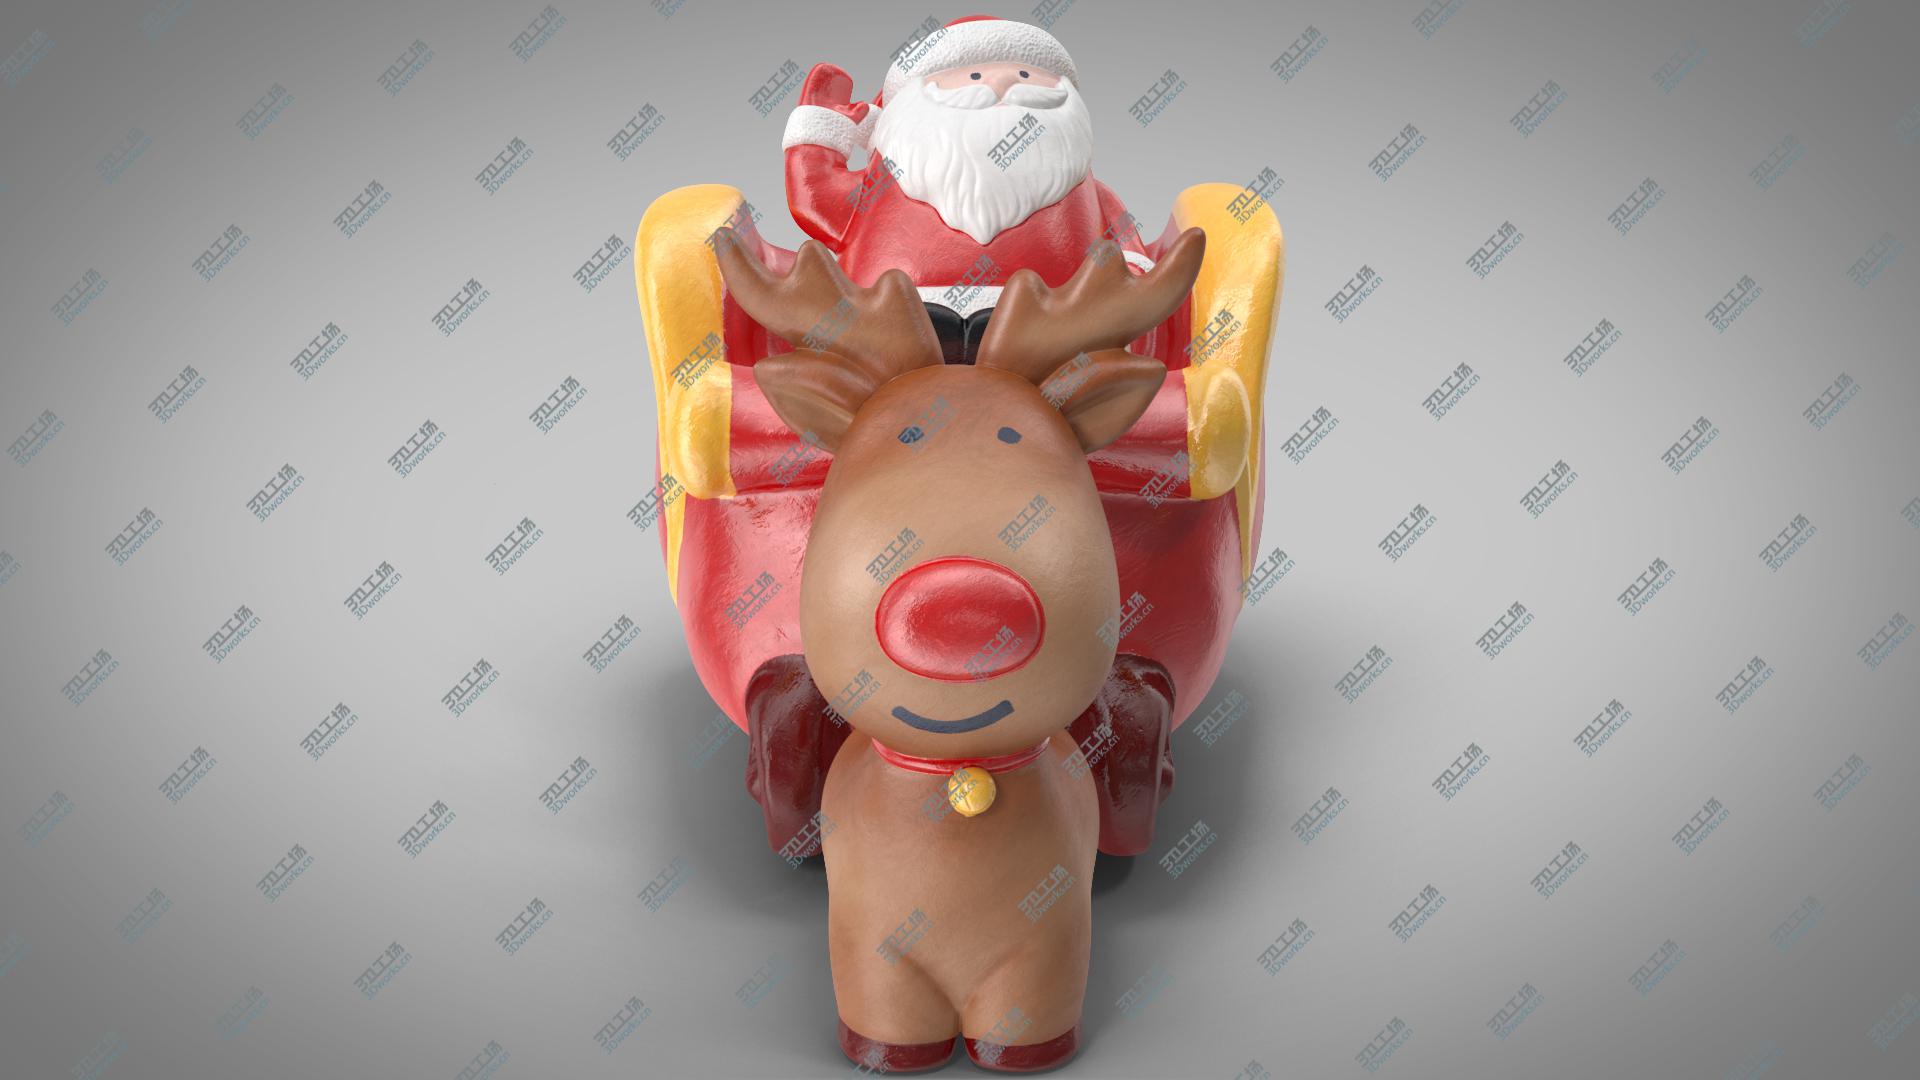 images/goods_img/202105071/Santa Claus with Sleigh Decorative Figurine 3 3D/2.jpg